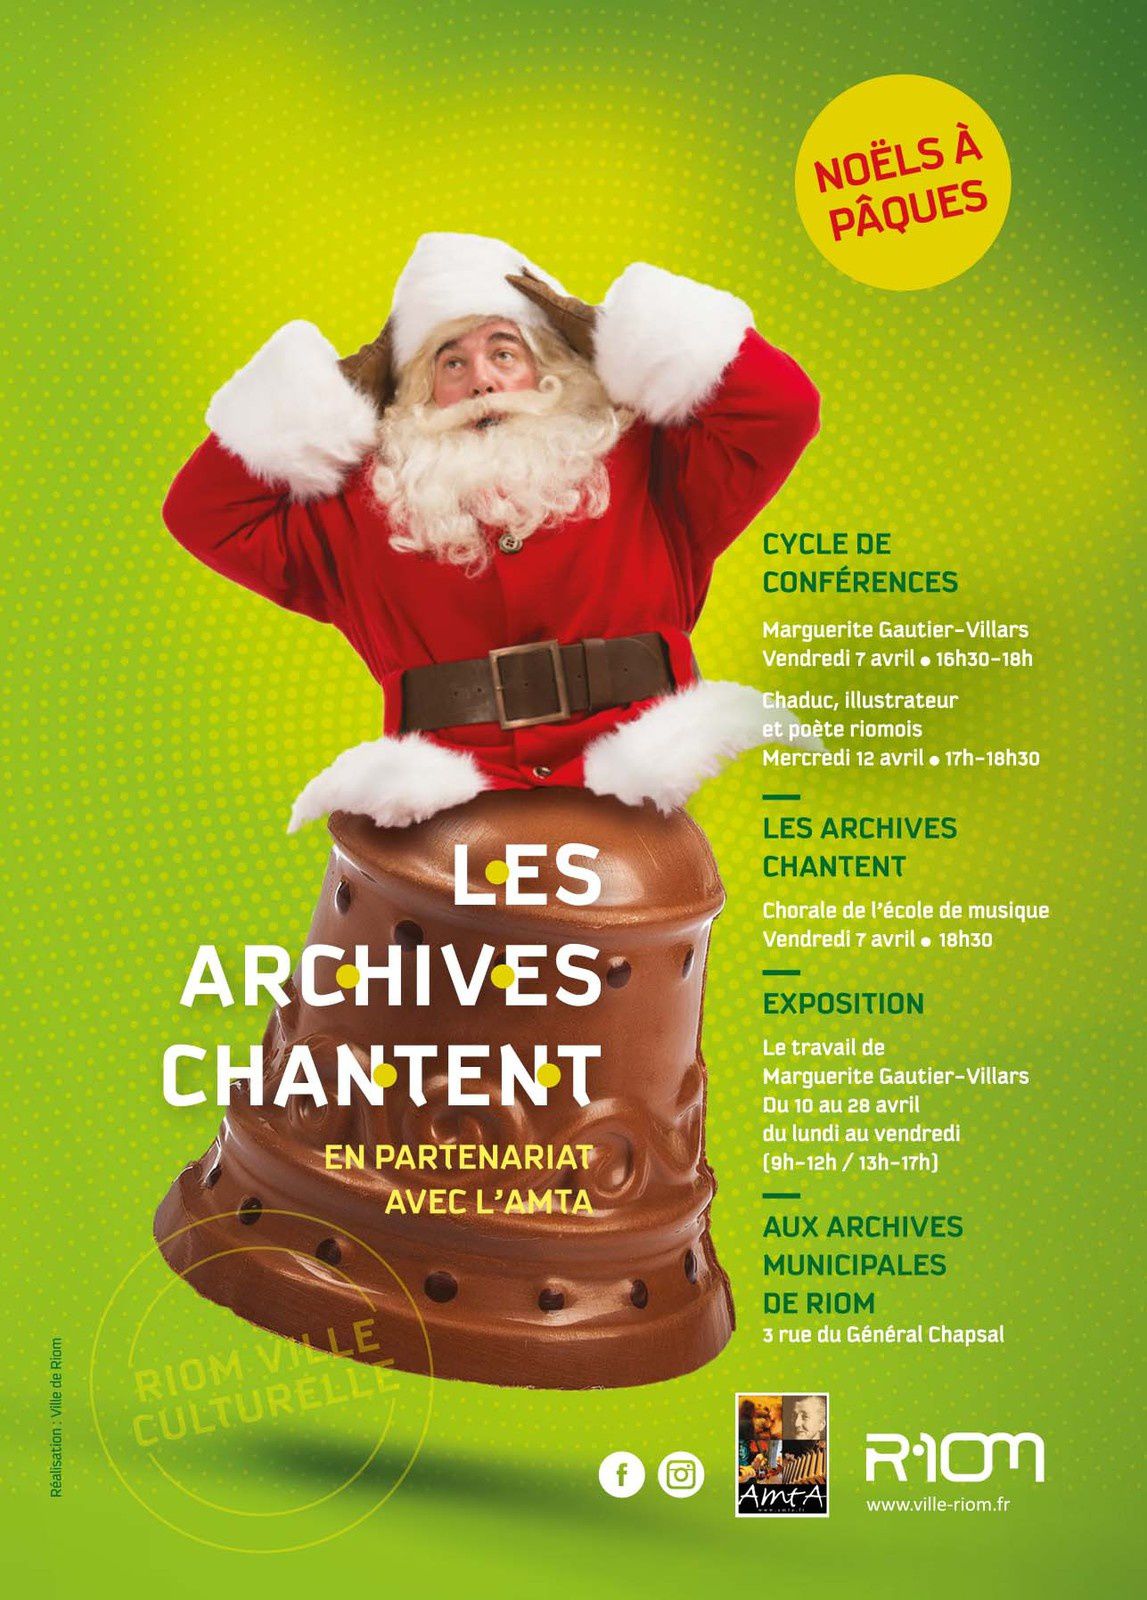 Les archives exposent